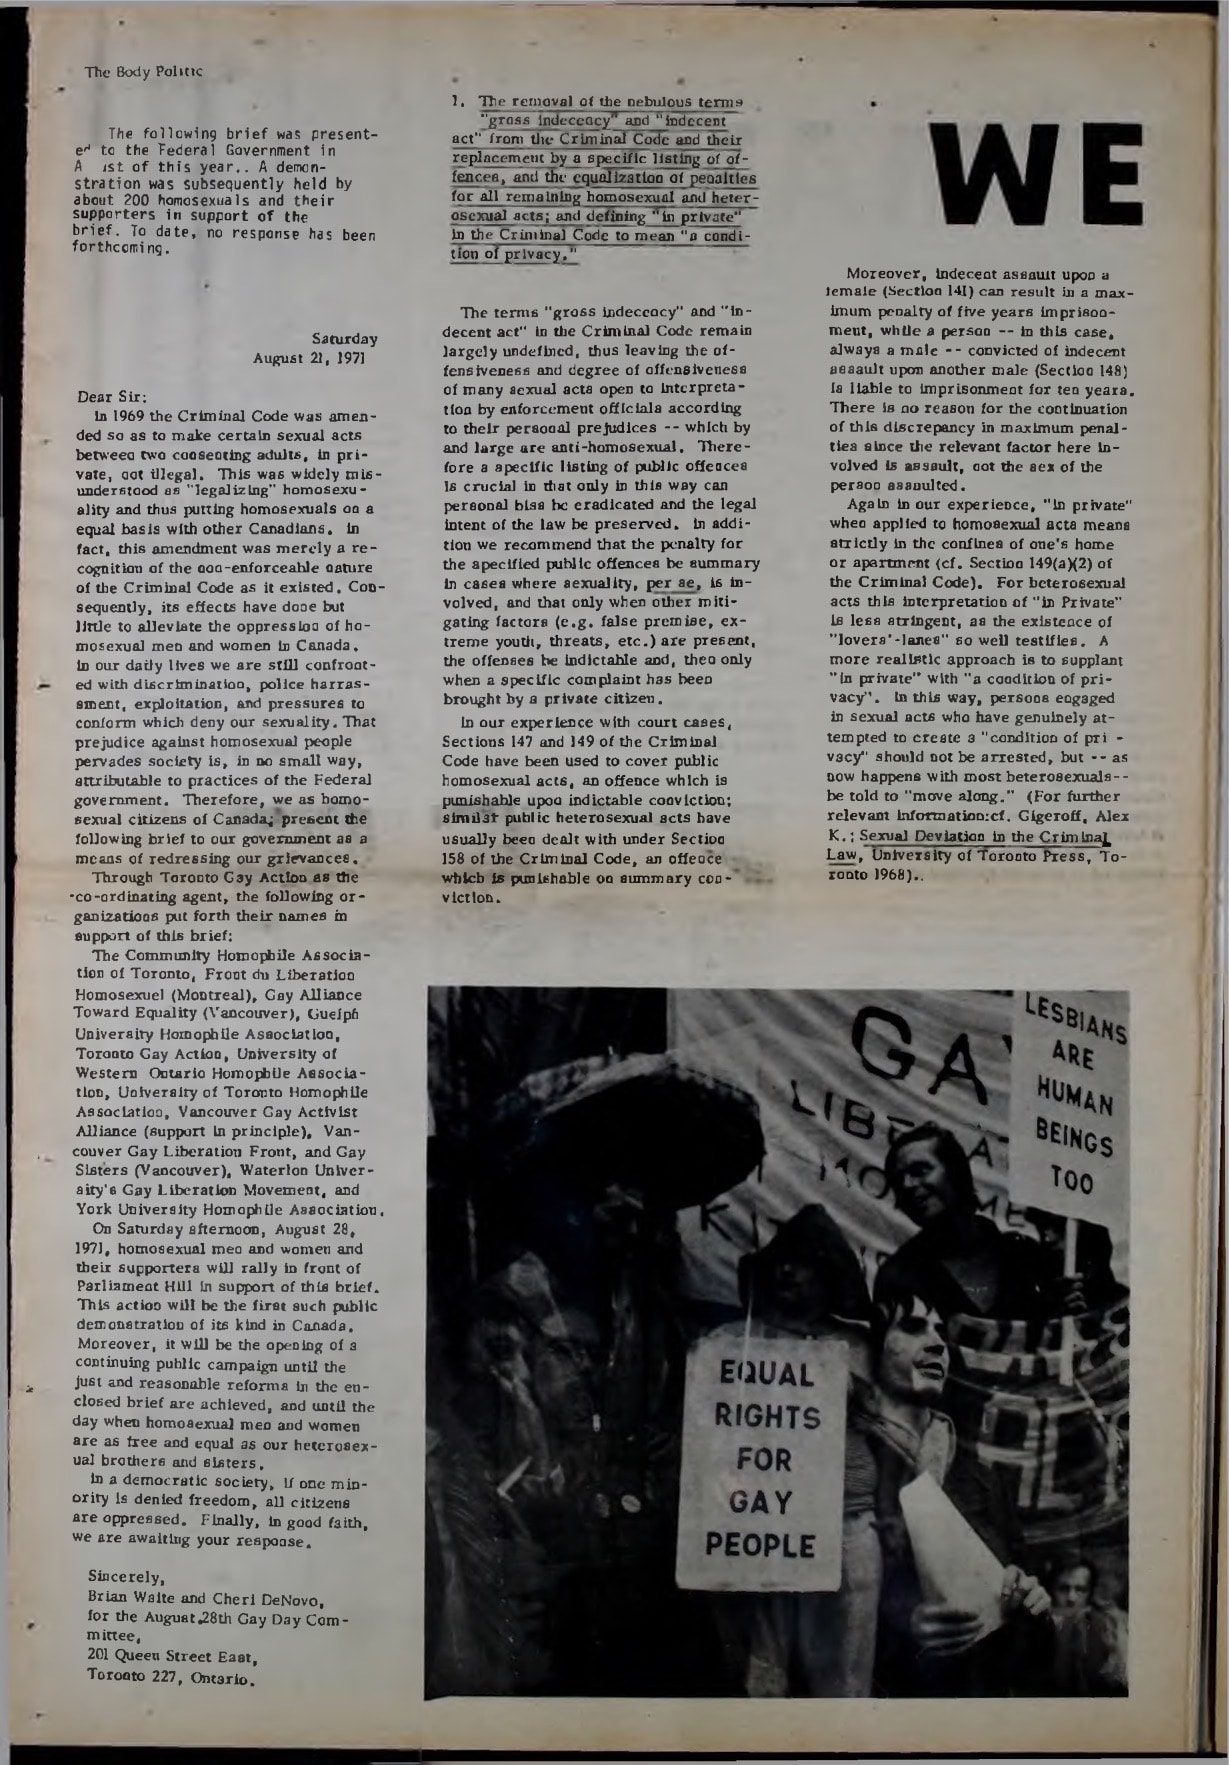 Page from a newsmagazine. At the bottom right, there is a photo of protestors holding signs reading, “equal rights for gay people” and “lesbians are people too.”